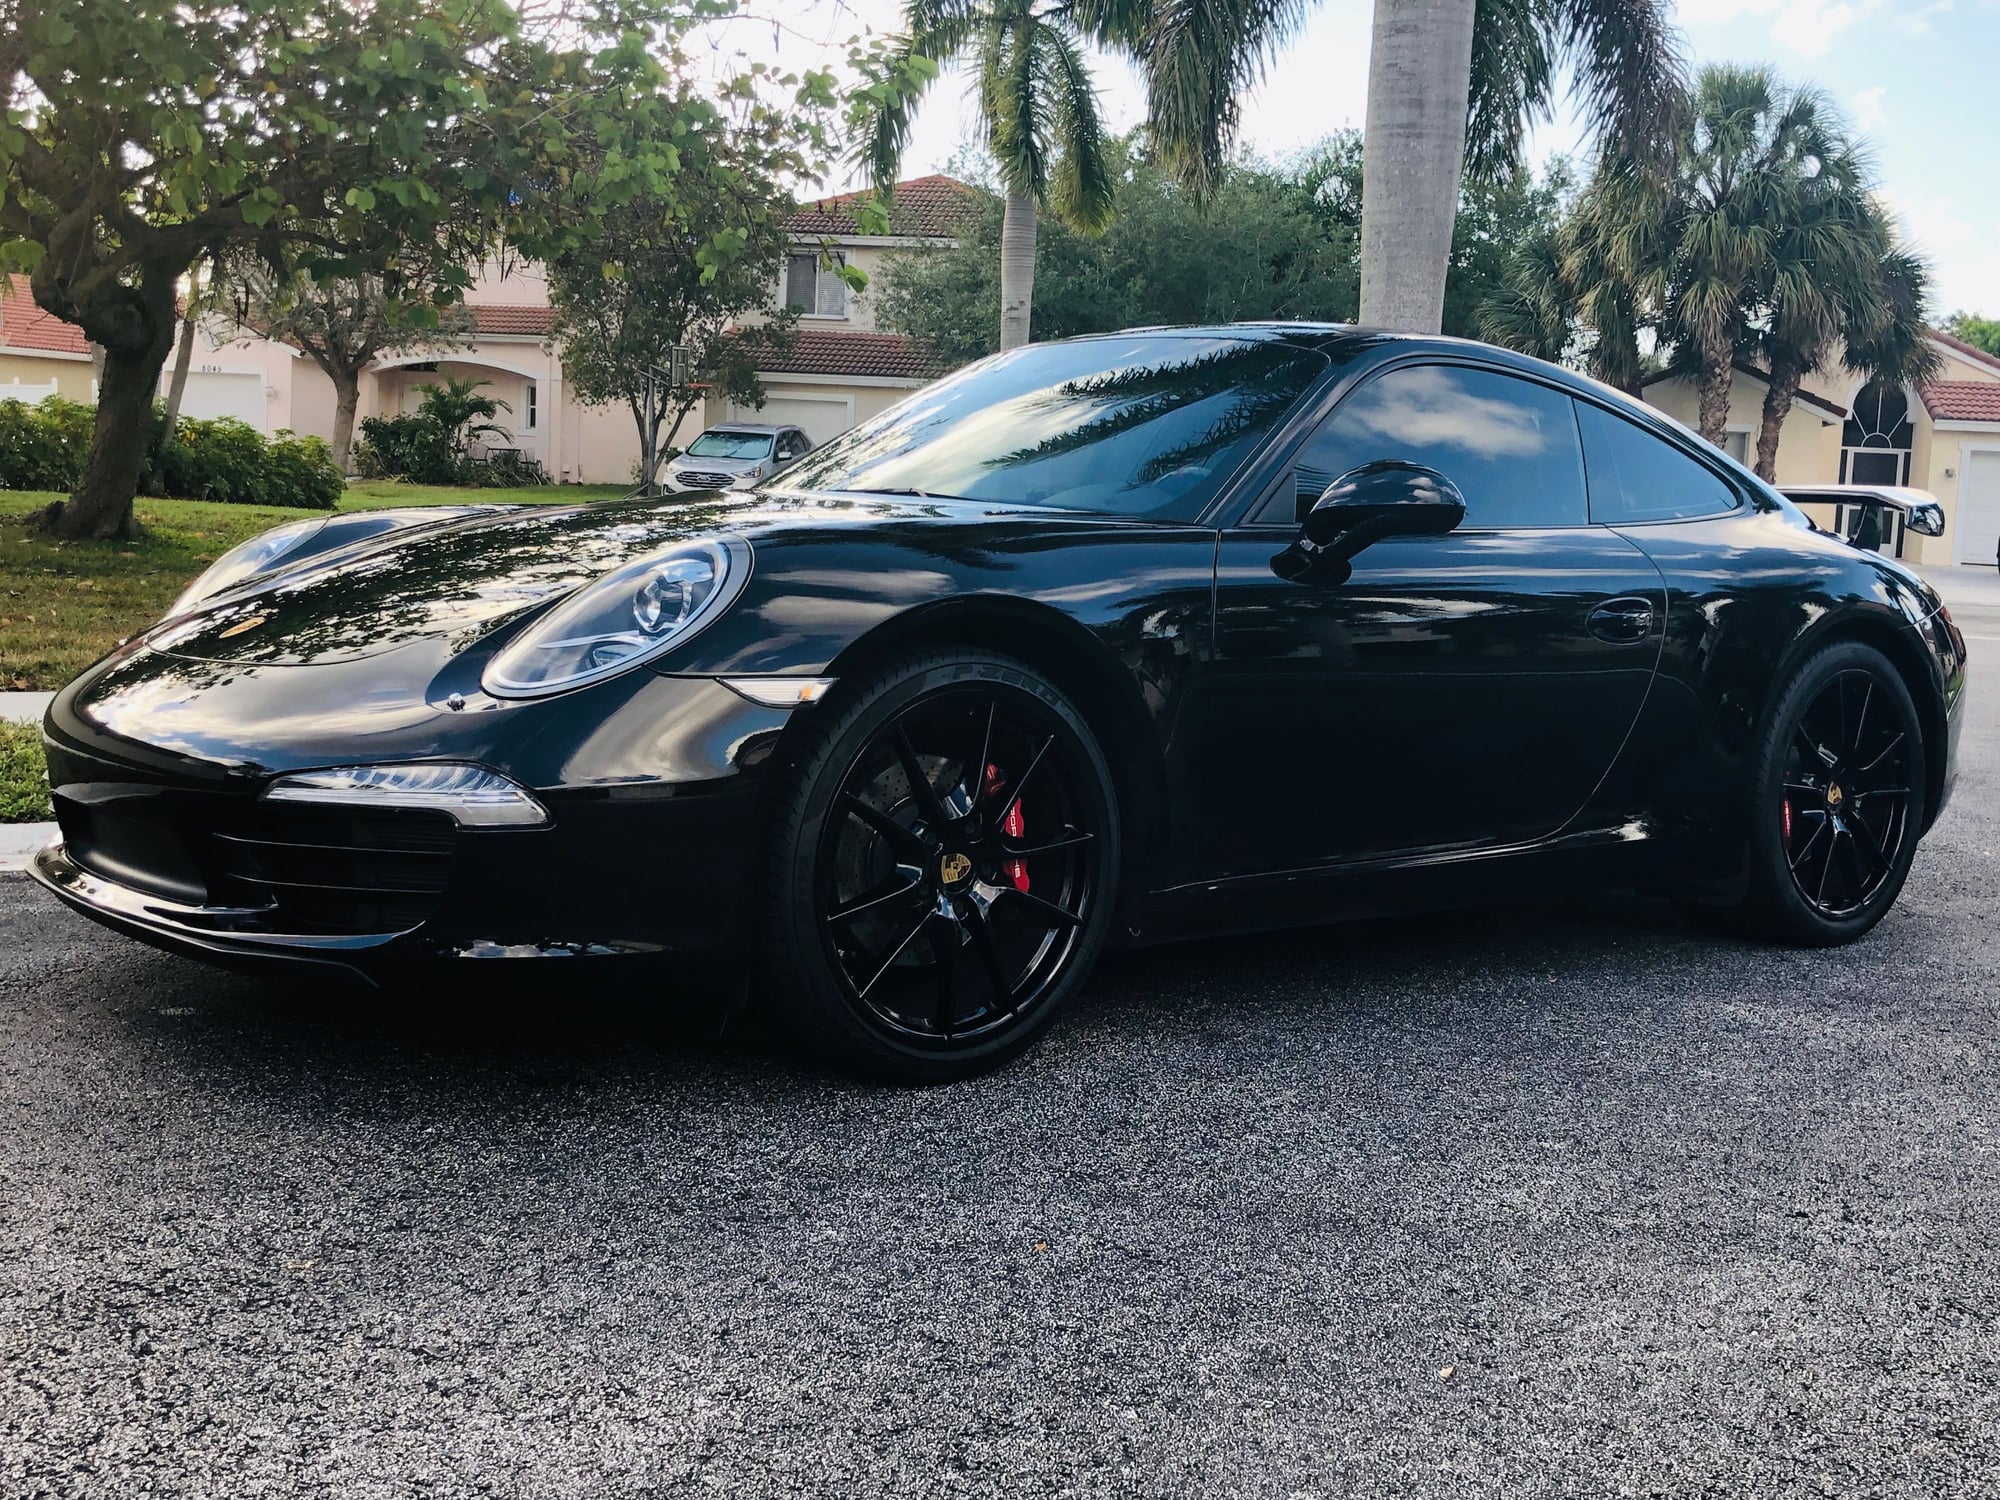 2015 Porsche 911 - 2015 CPO 911 low miles - Used - VIN WP0AA2A90FS106763 - 17,468 Miles - 6 cyl - 2WD - Automatic - Coupe - Black - West Palm Beach, FL 33467, United States